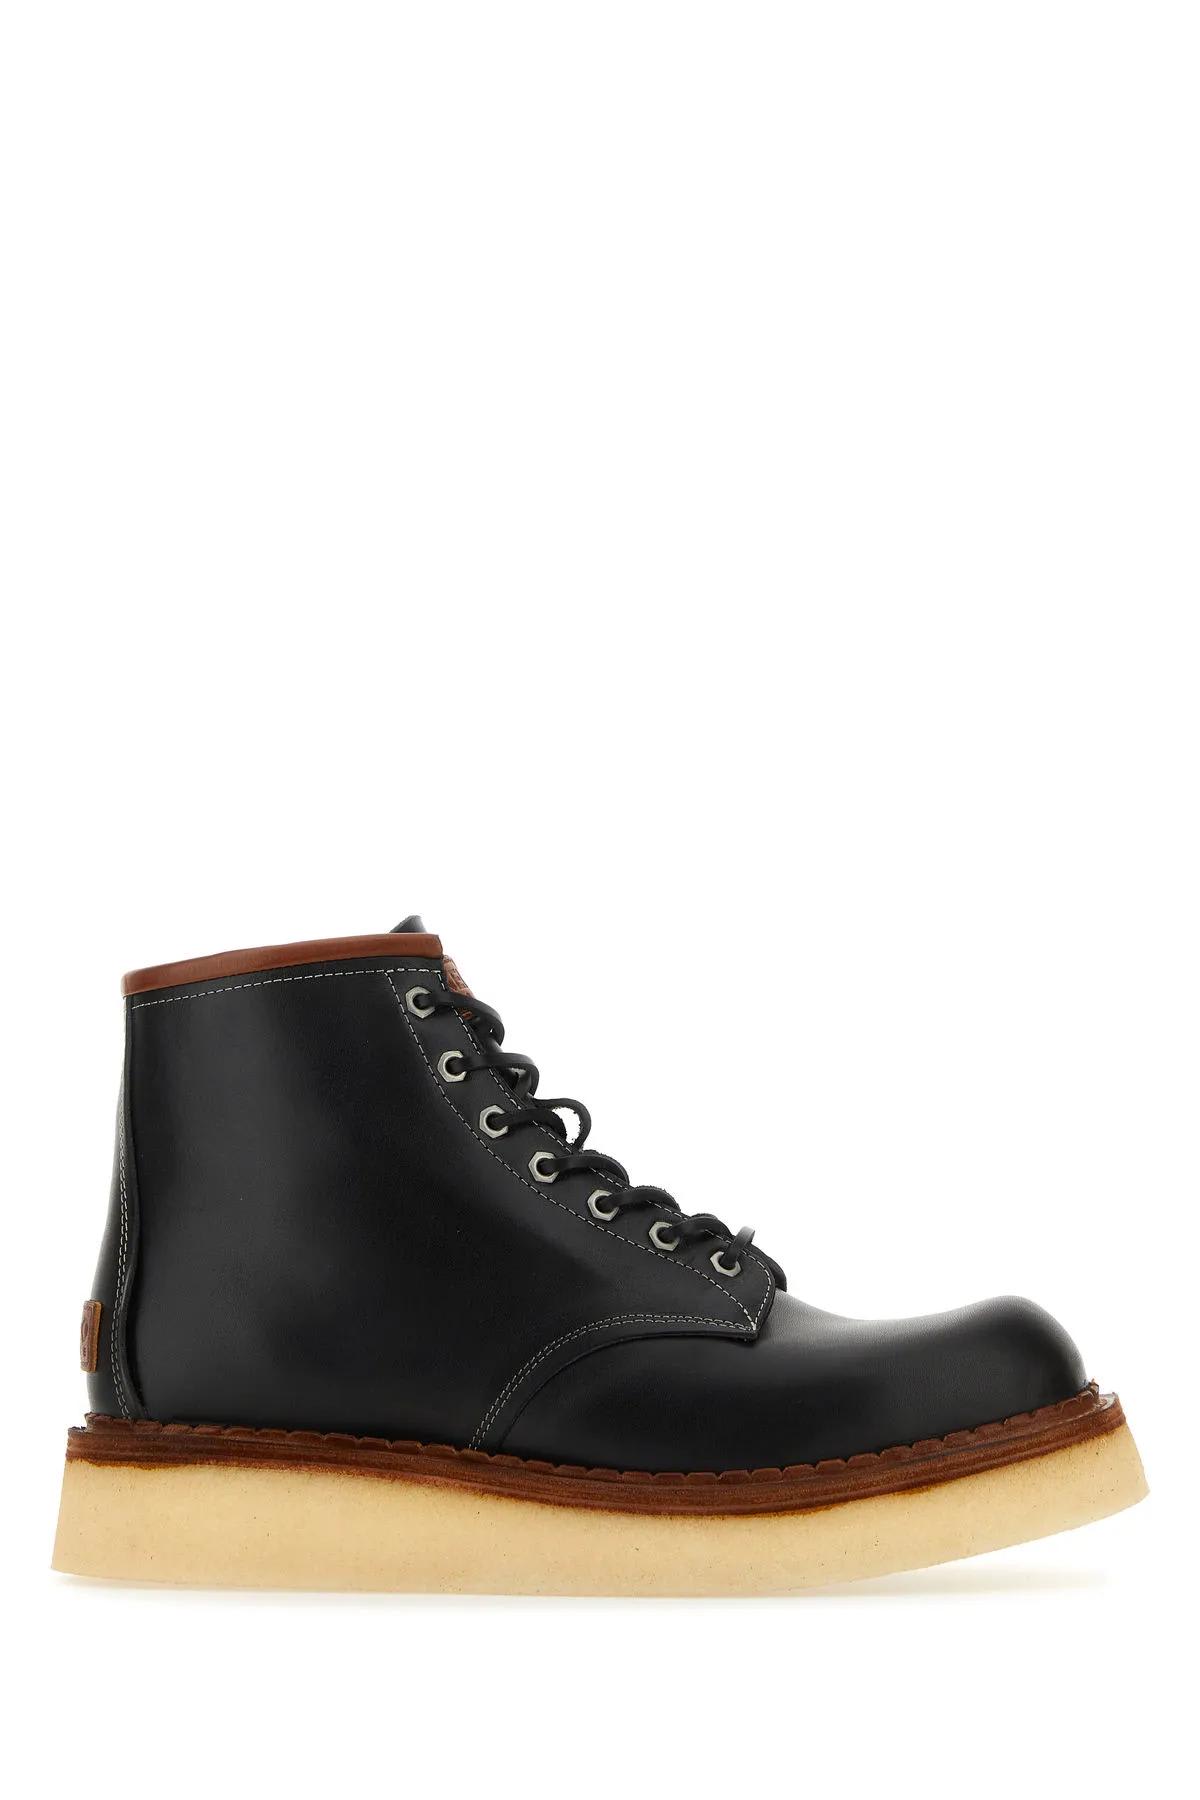 KENZO BLACK LEATHER WEDGE ANKLE BOOTS